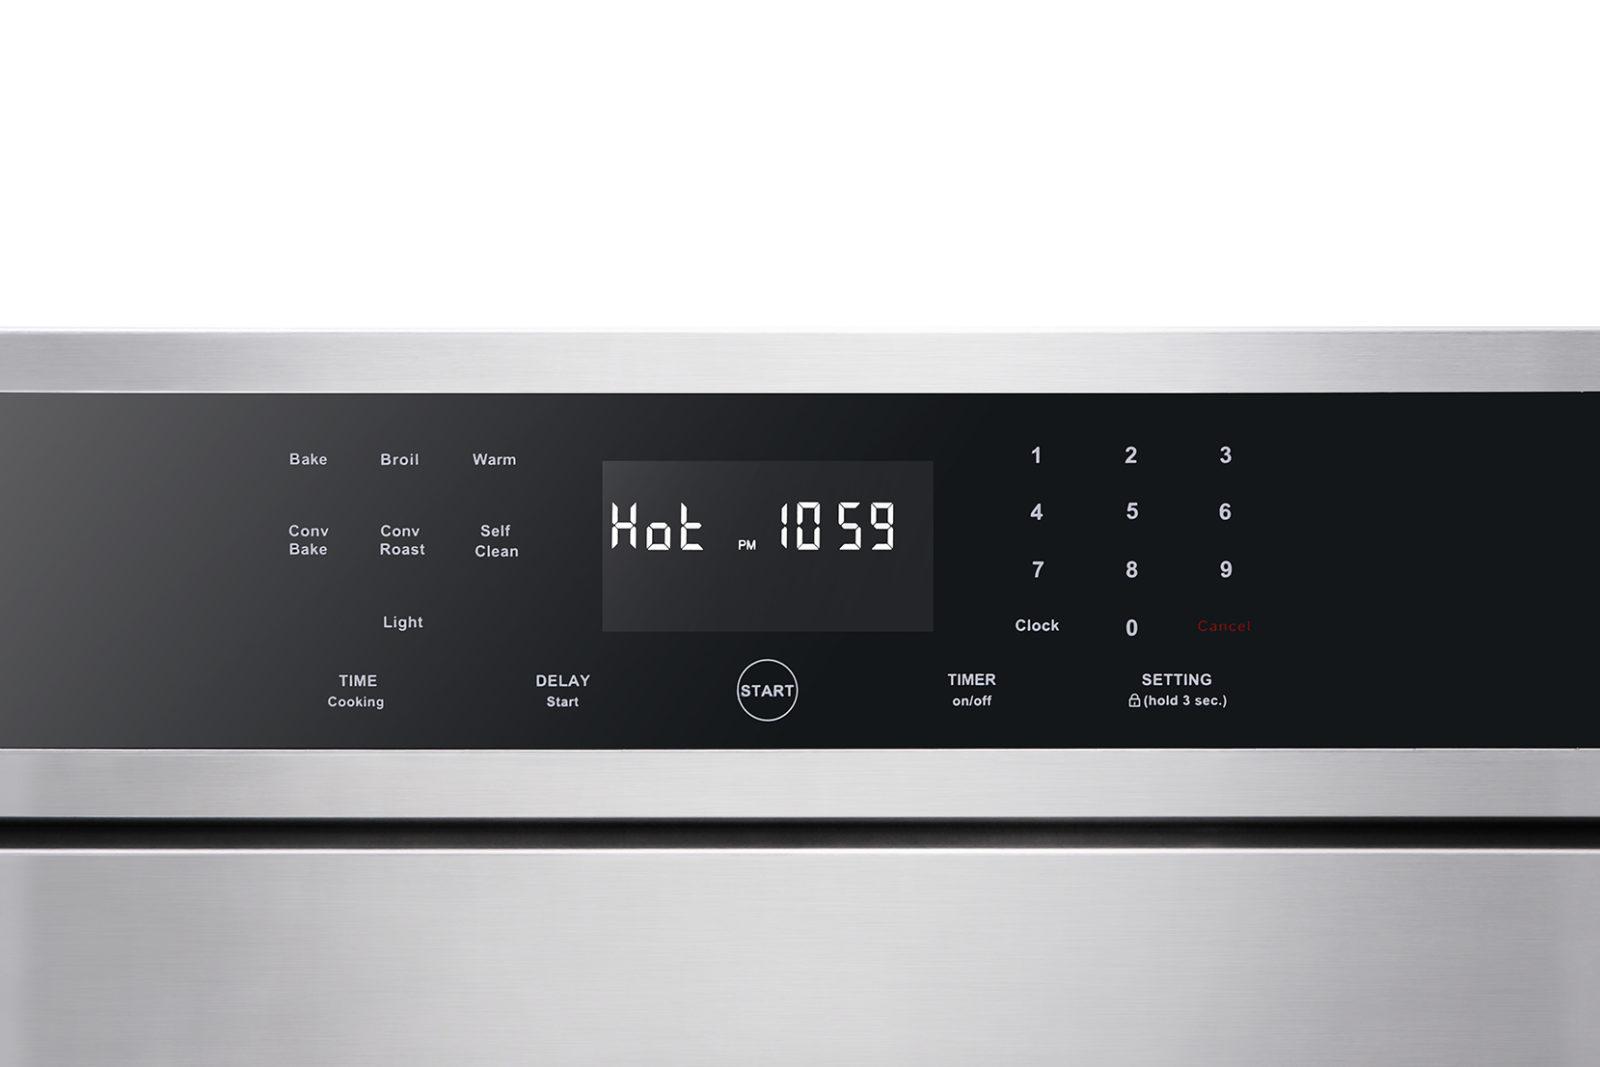 Thor Kitchen 30 Inch Professional Self-cleaning Electric Wall Oven - Model Hew3001